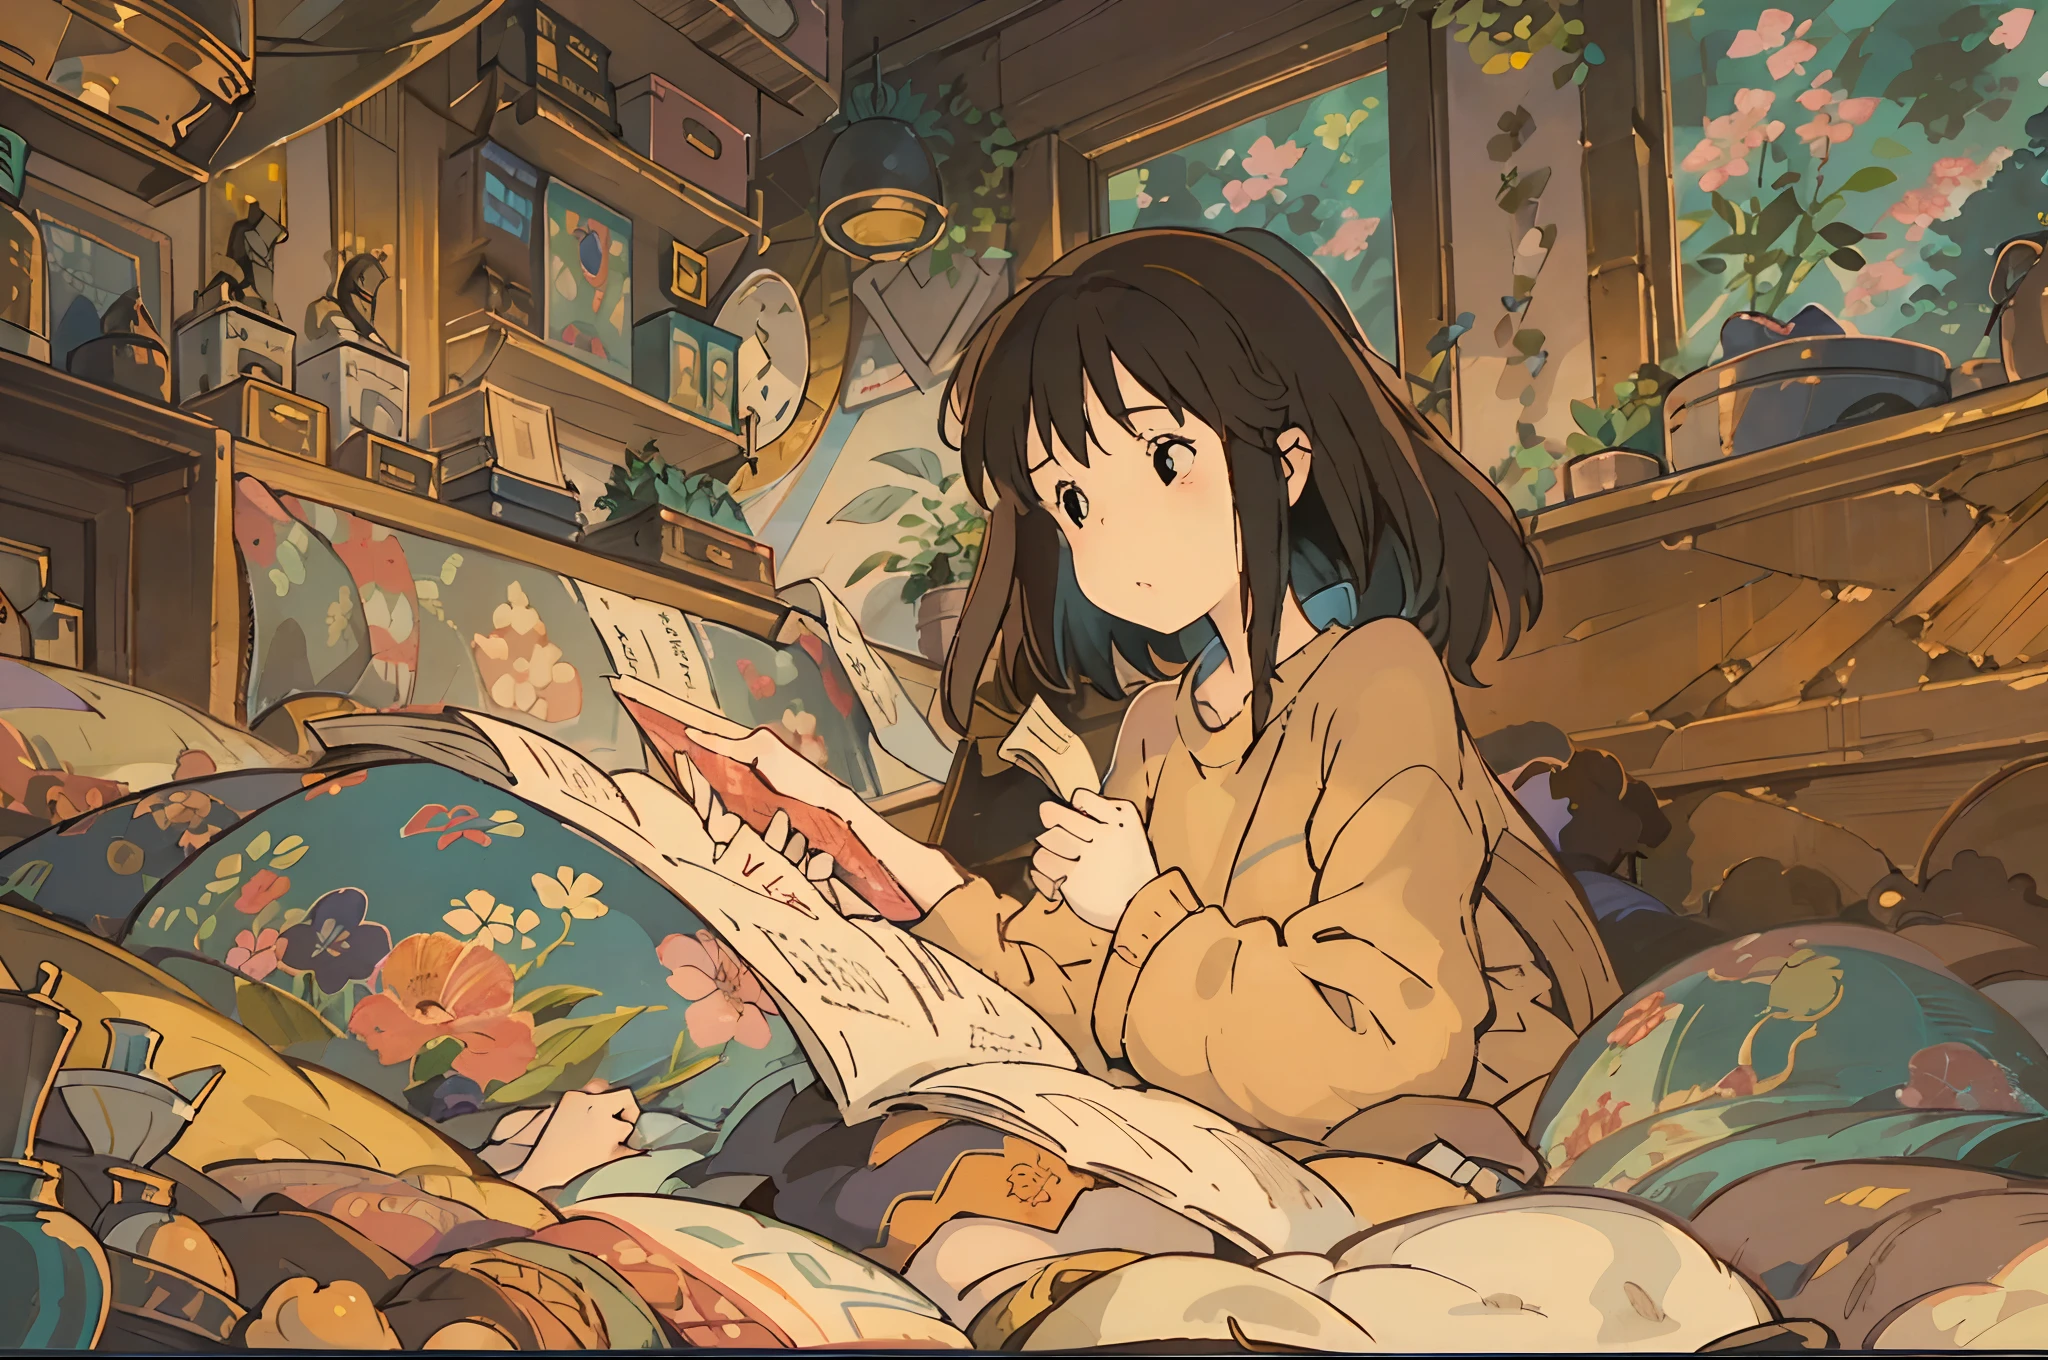 A digital illustration of 2 girls fully engrossed in reading on a comfortable bed, inspired by Hayao Miyazaki's style. The artwork should be filled with enchanting and captivating details, radiating a touch of fantasy. The girls should have beautiful, captivating eyes that are intricately detailed, as well as wonderfully delicate lips. The scene should be visually appealing, featuring a cozy and inviting environment. The illustration should be created using various mediums, such as digital illustration, to enhance the overall visual effect. The attention to detail should be remarkable, ensuring that every element is depicted with utmost precision. The image should possess an extremely high quality, with a resolution of 4k or 8k, and be a masterpiece in its own right. The style of the artwork should capture the essence of Hayao Miyazaki's renowned works, presenting a unique blend of imagination, storytelling, and vibrant visuals. The colors used should be warm and inviting, creating a soothing and cozy atmosphere. The lighting should be skillfully rendered, illuminating the scene in a soft and gentle manner. Overall, the illustration should transport viewers into a world of wonder and magic, where they can fully immerse themselves in the joy of reading. The combination of Miyazaki's iconic style, enchanting details, warm tones, and a hint of fantasy should come together to create an awe-inspiring and captivating piece of art.